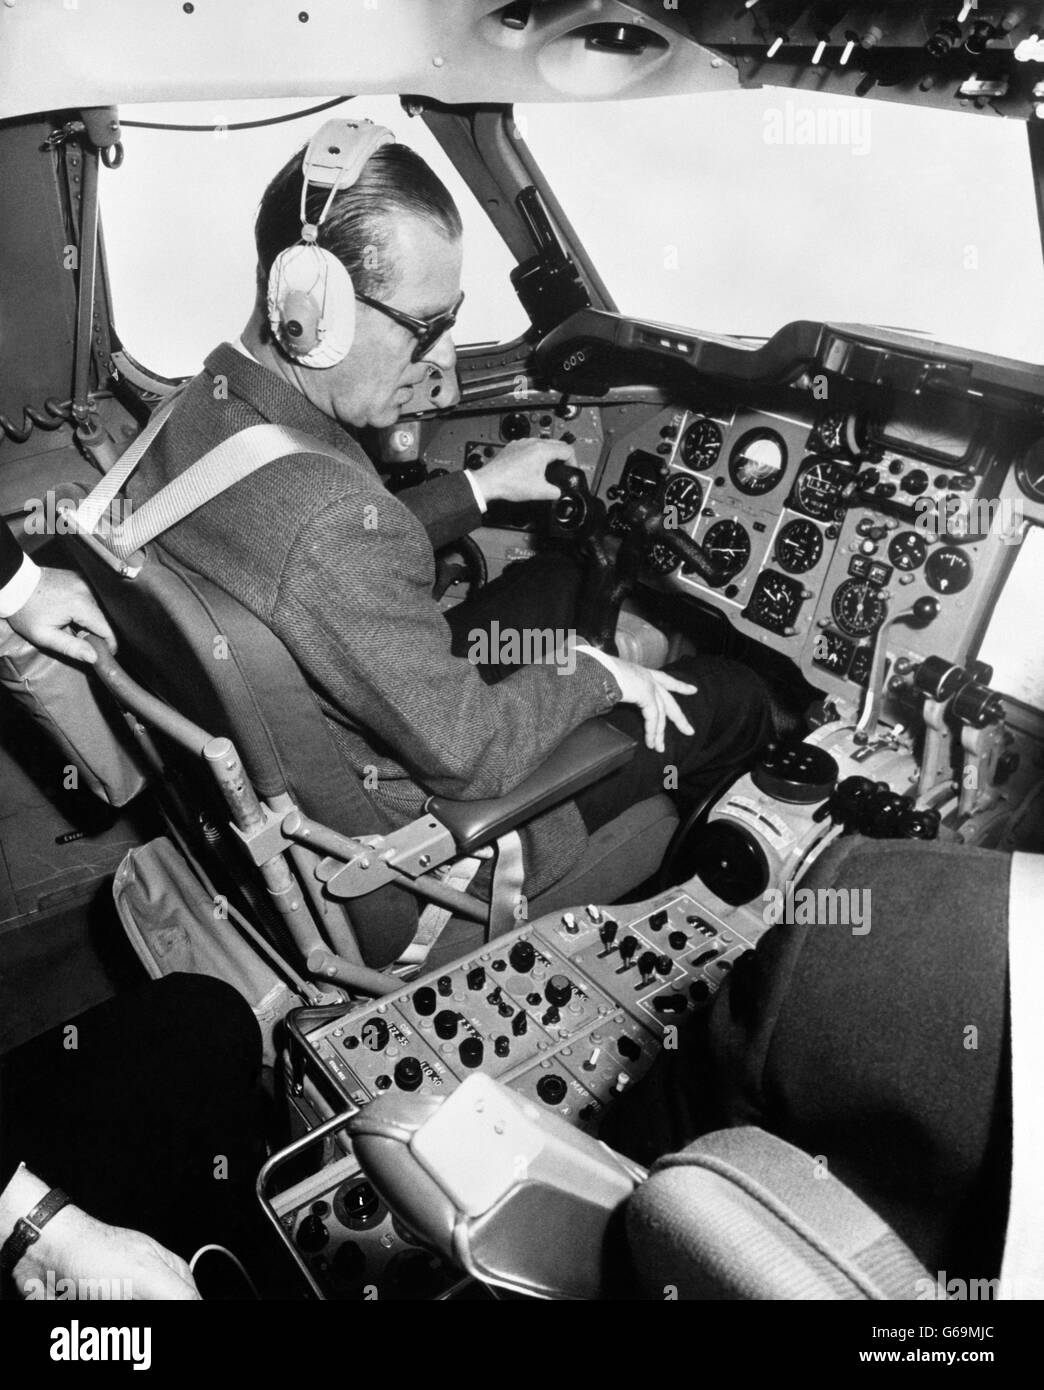 Prince Philip, The Duke of Edinburgh, looks at the array of instruments as he takes over the controls during a 75-minute flight in a new Trident jet airliner of British European Airways. The flight was made during a visit to the airline's training unit at Stansted Airport, Essex. His Royal Highness made two landings with Captain W. Atkins, BEA Training Flight Manager, as his co-pilot. Also in the plane was Mr. Anthony II. Milward, BEA chairman Stock Photo